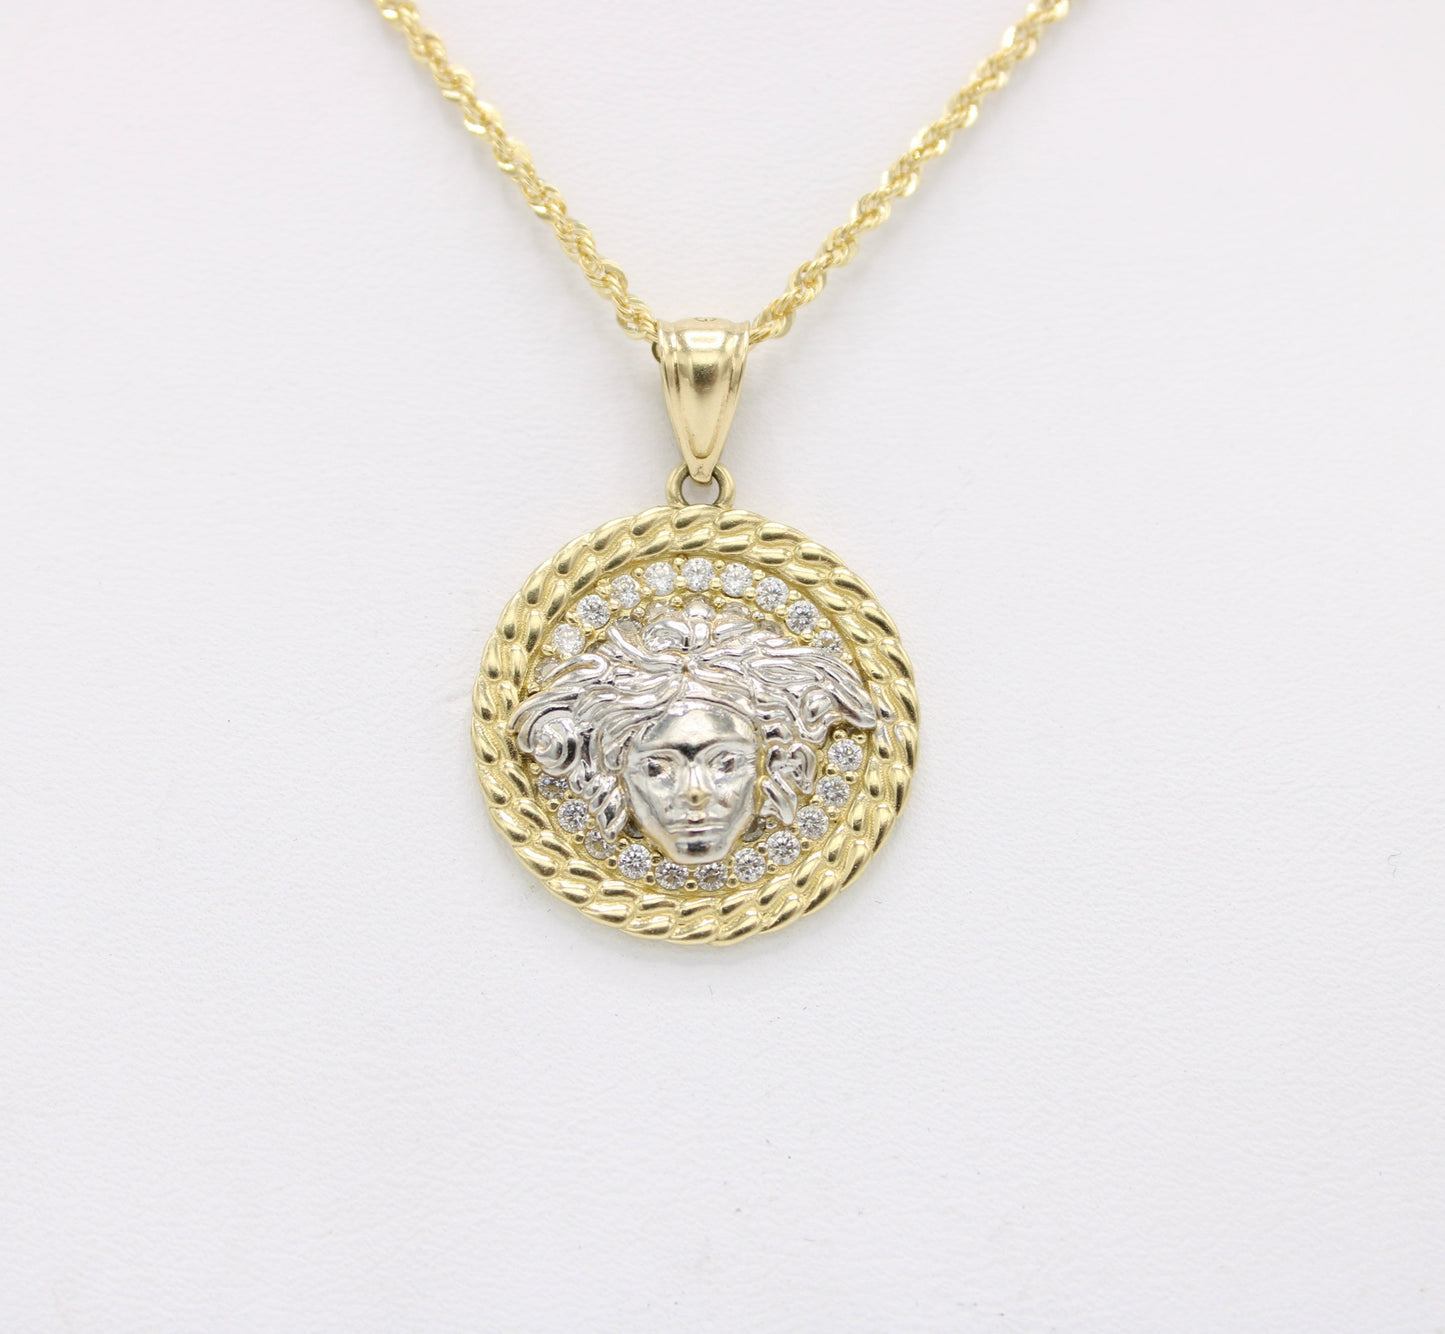 14k Medusa Pendant Cz Stones with Rope Chain Yellow Gold